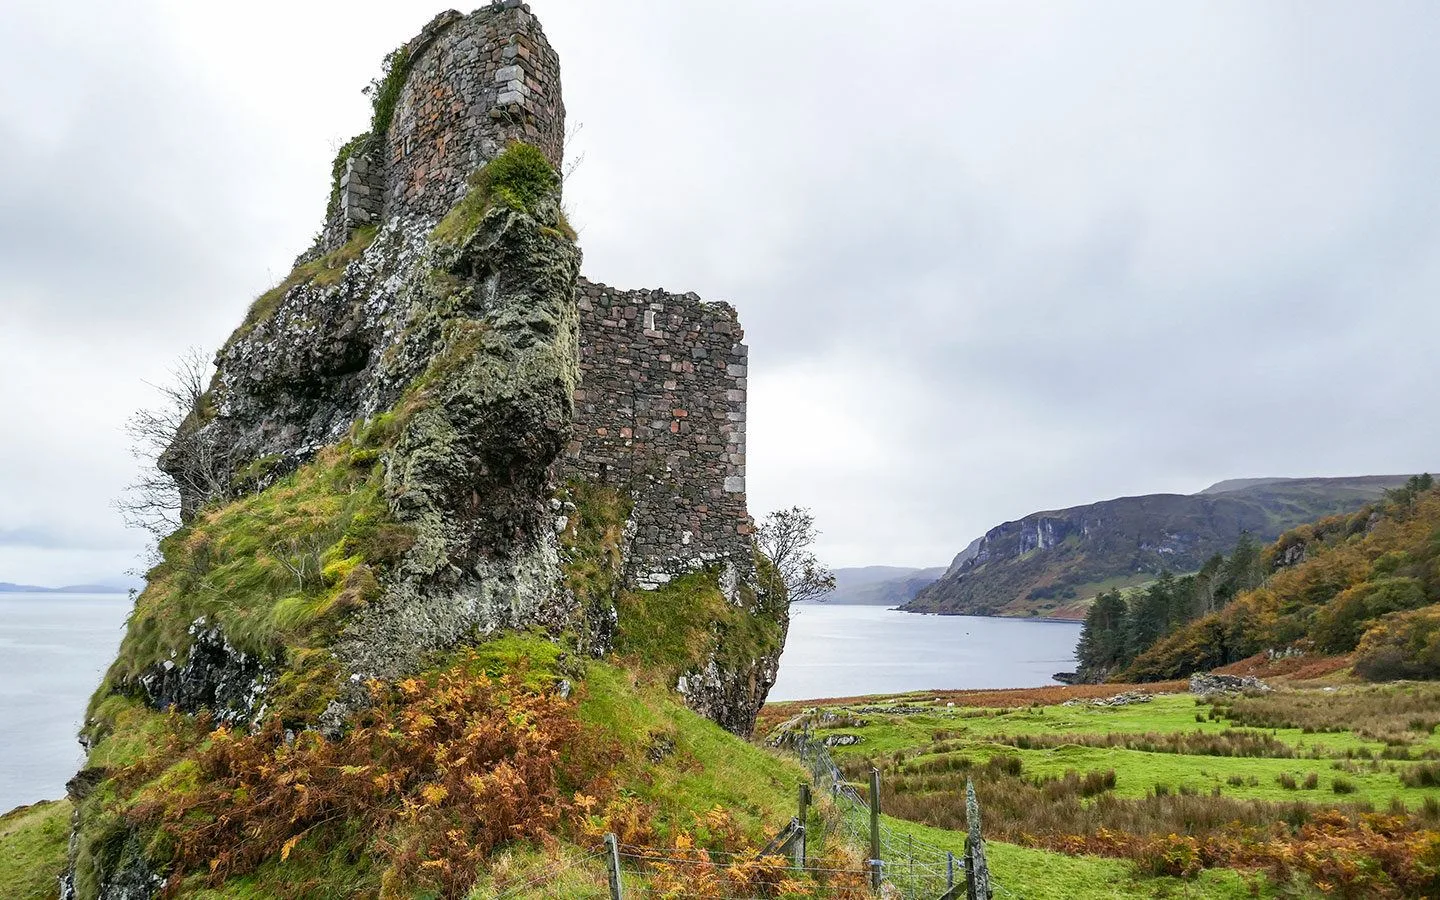 Visiting Brochel Castle ruins on a day trip to Raasay island in the Inner Hebrides, Scotland